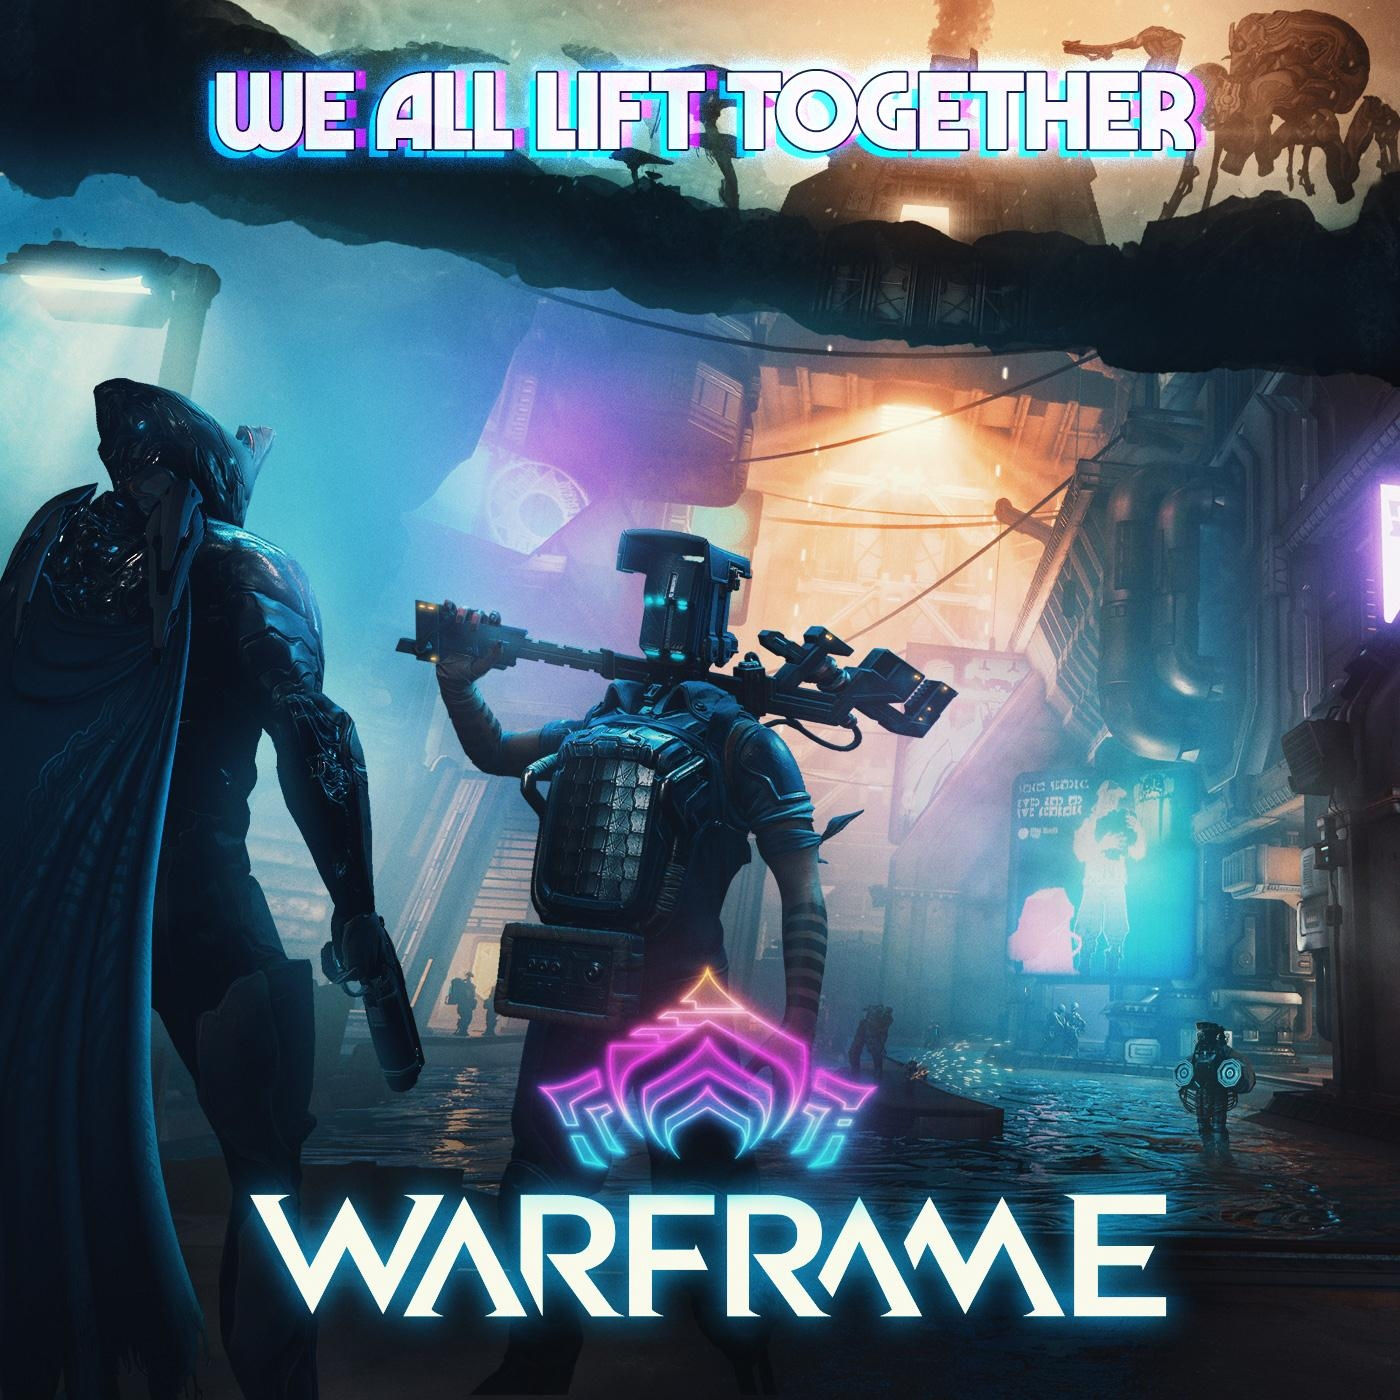 We all lift together from warframe текст (120) фото